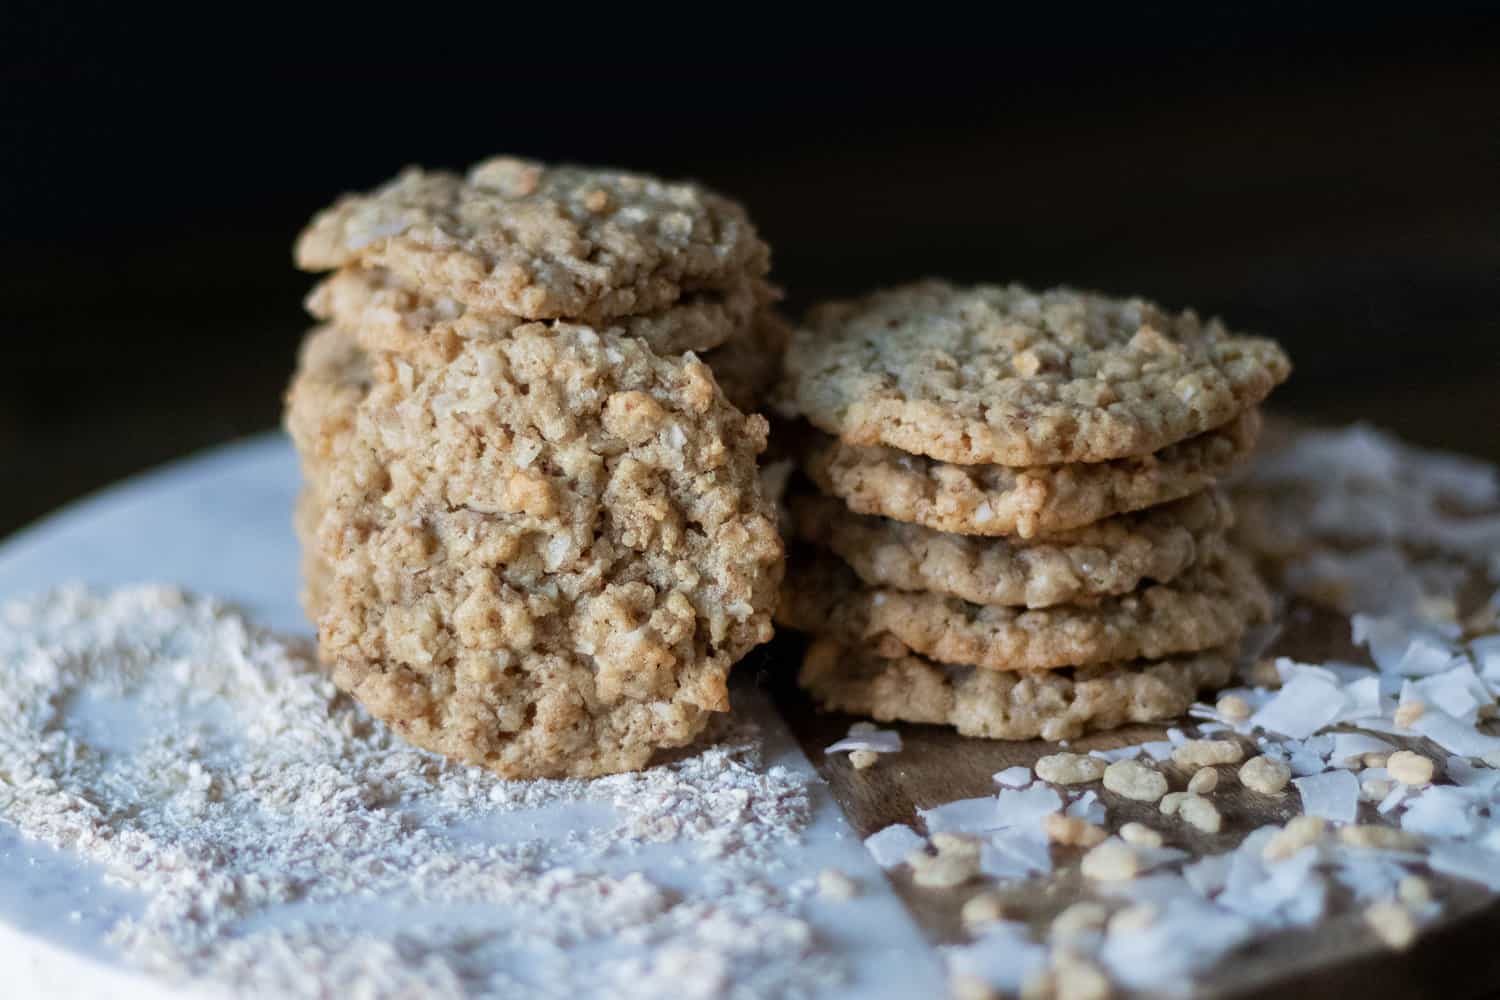 A straight view of stacked vegan ranger cookies with coconut, oats, and rice cereal spread on the sides.